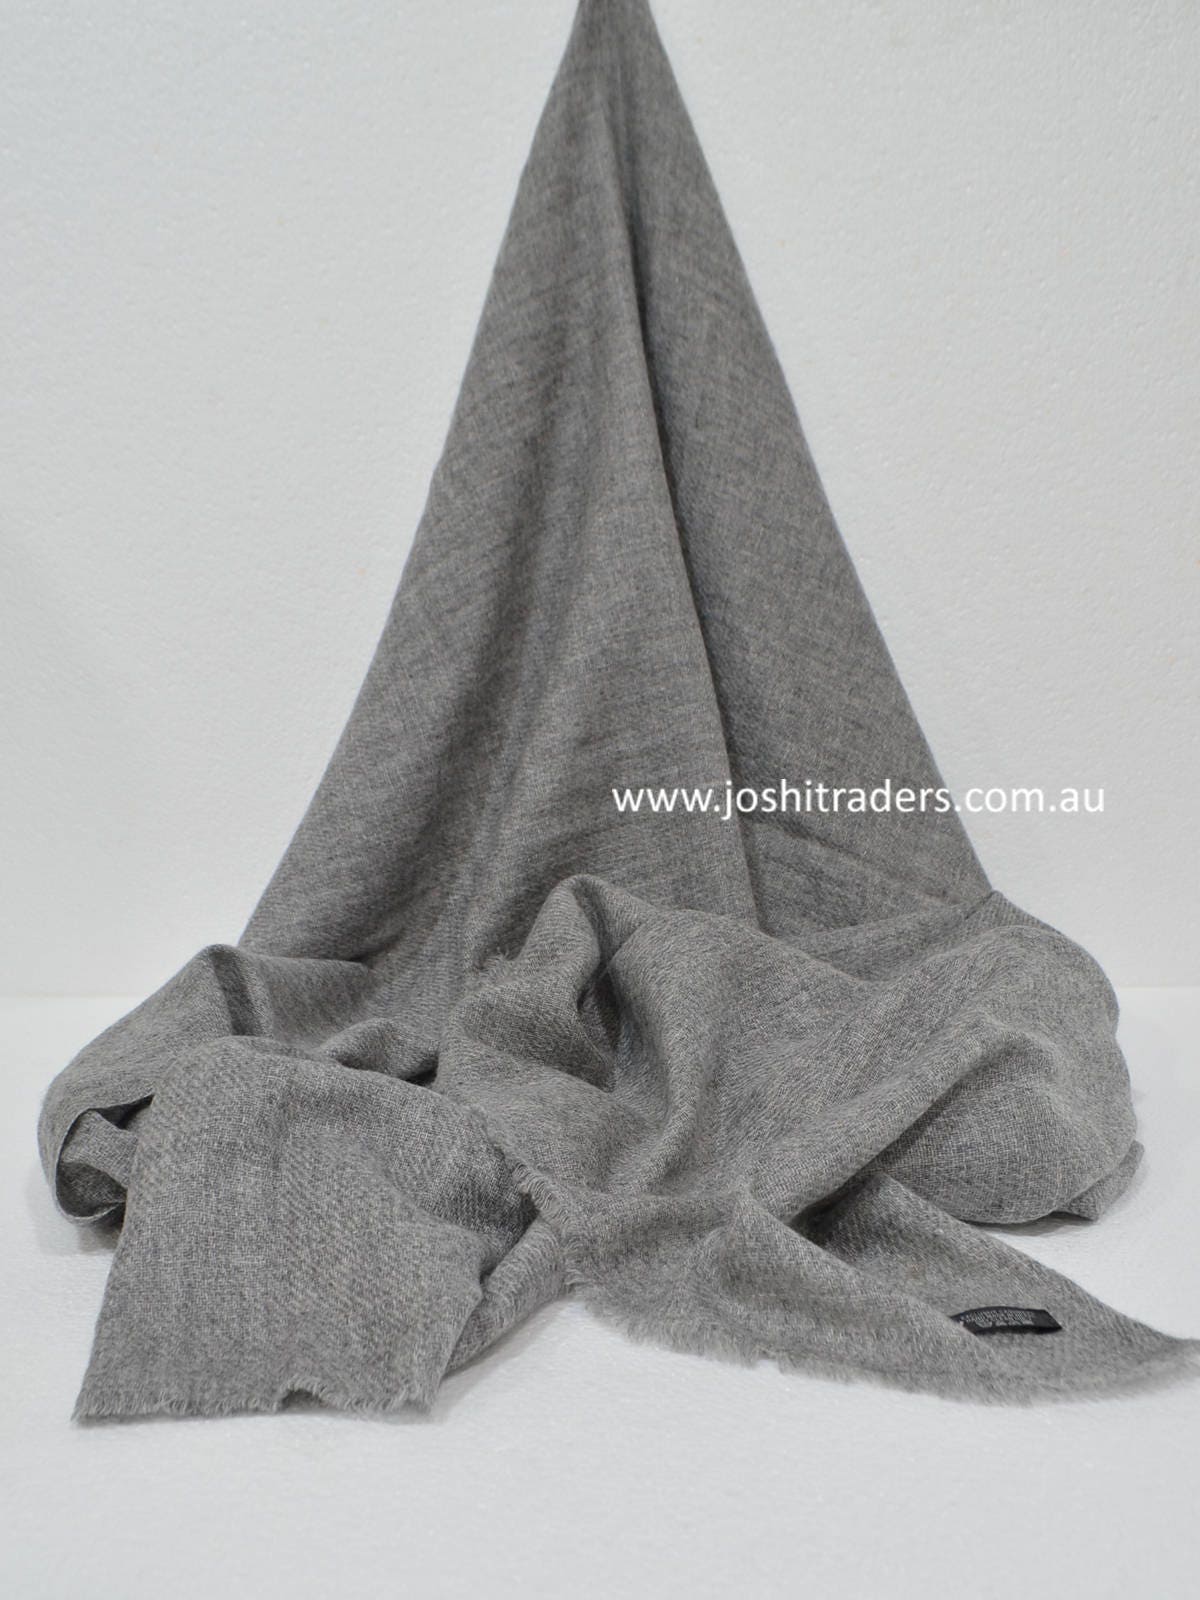 Dark Charcoal Cashmere Scarf Shawl Stole Wrap Throw 100% Pashmina Nepalese Handmade Charcoal Cashmere Scarf shawl Cashmere Cashmere Cashmere